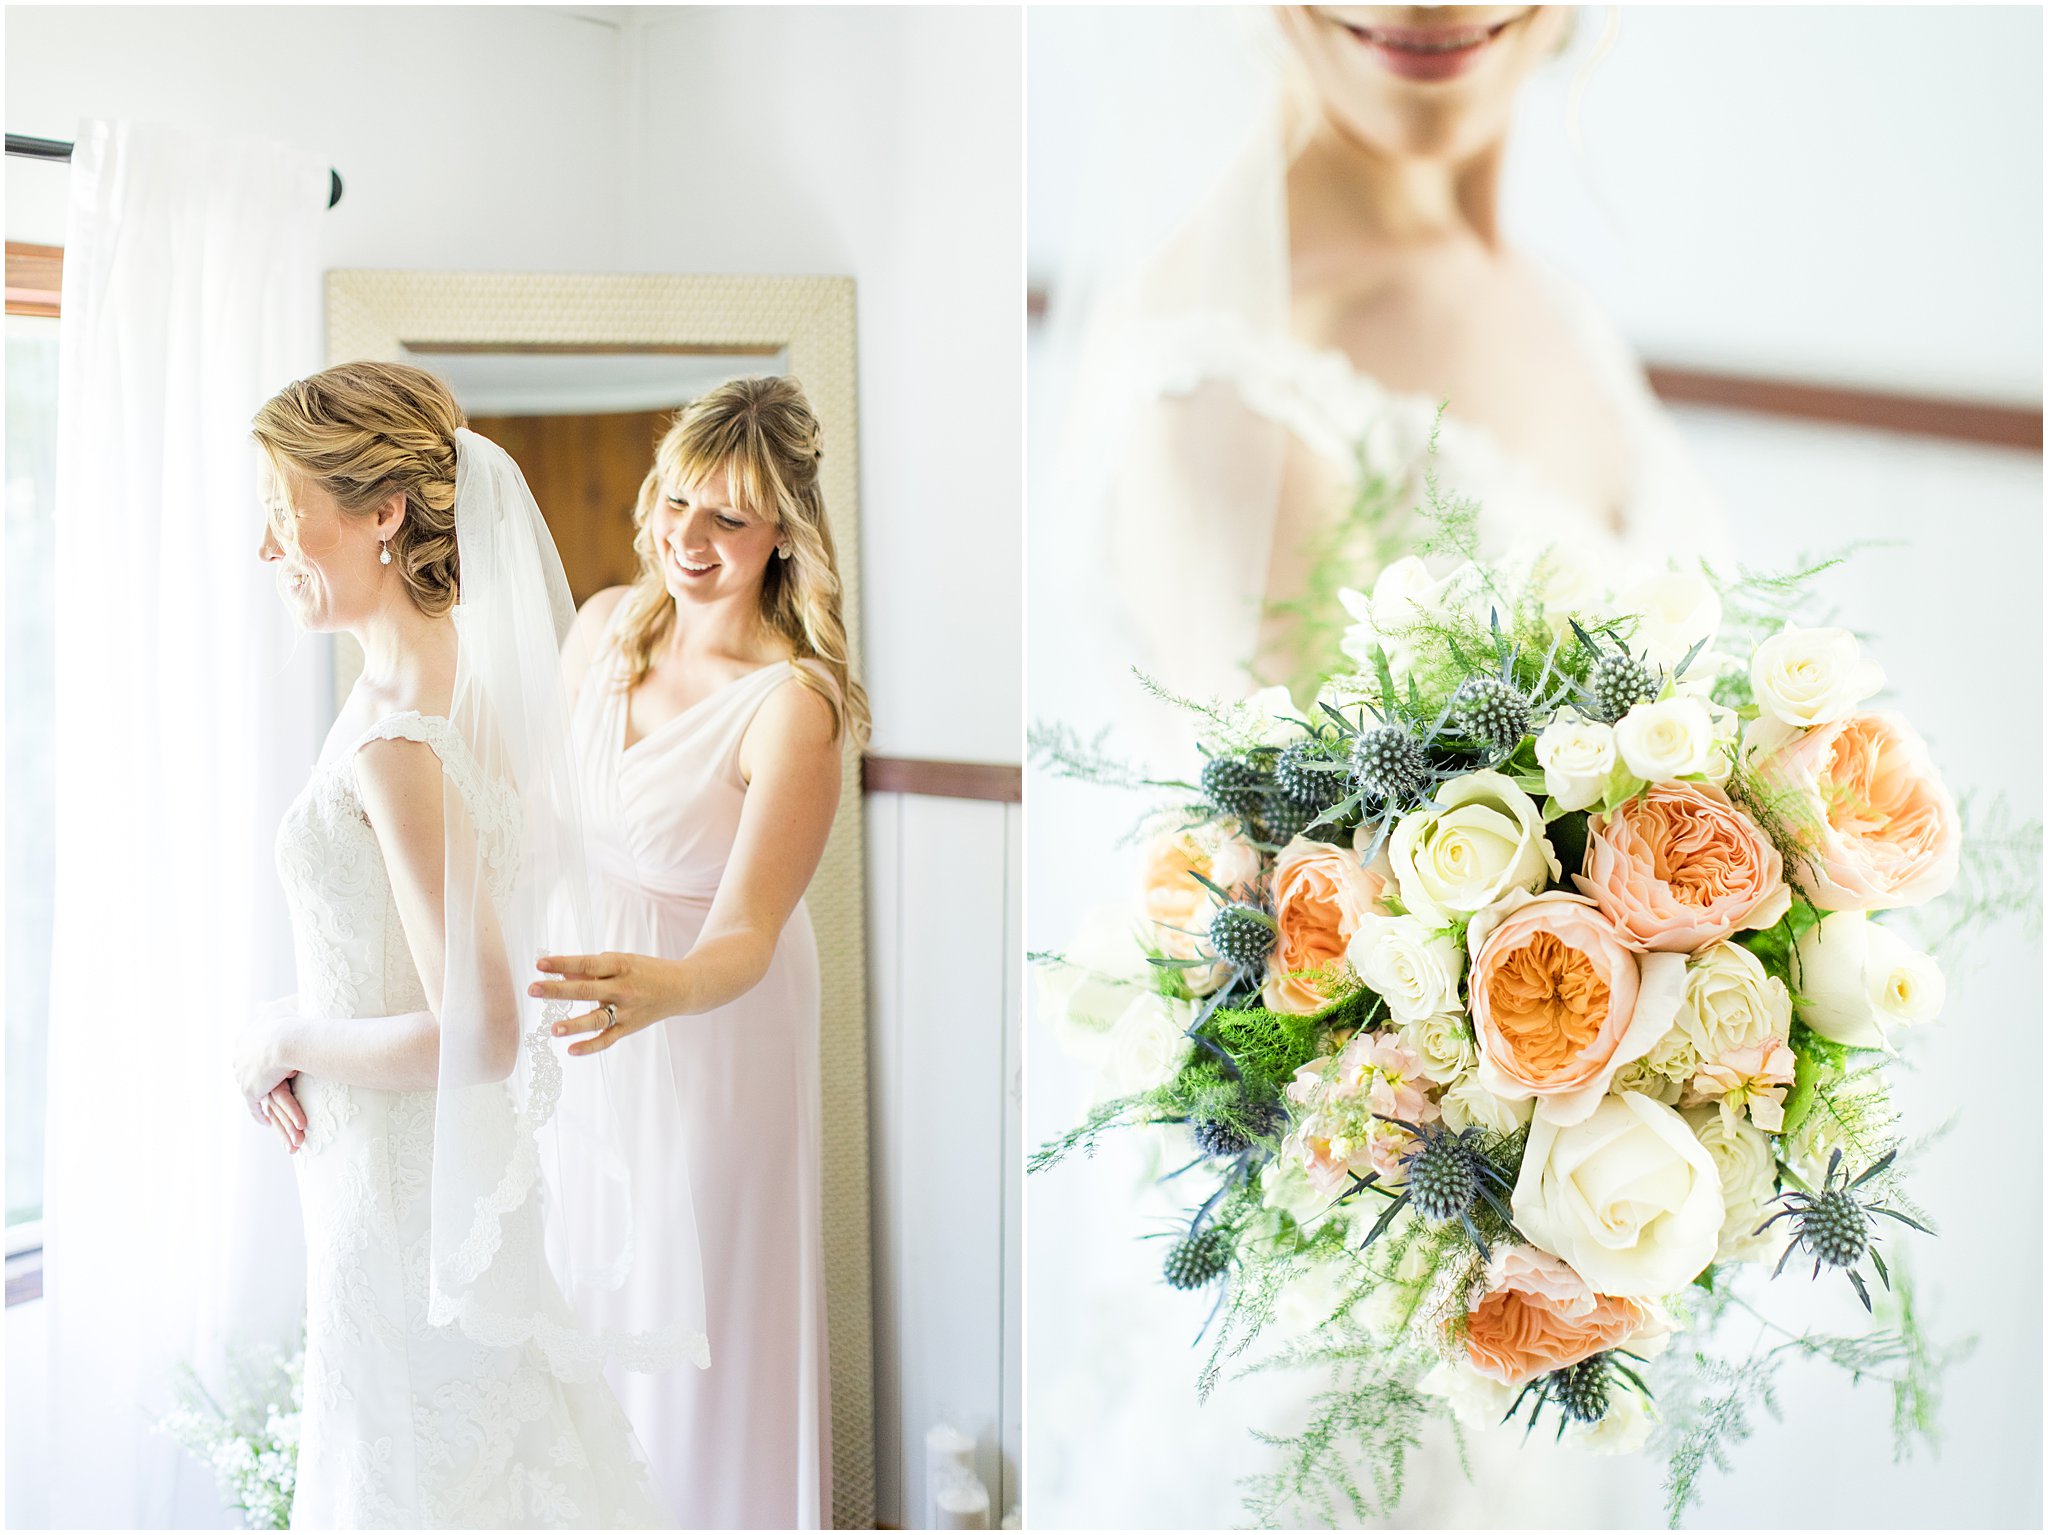 left photo - bridesmaid helping bride get into dress in beautiful room; right photo - close up of bride holding bridal bouquet